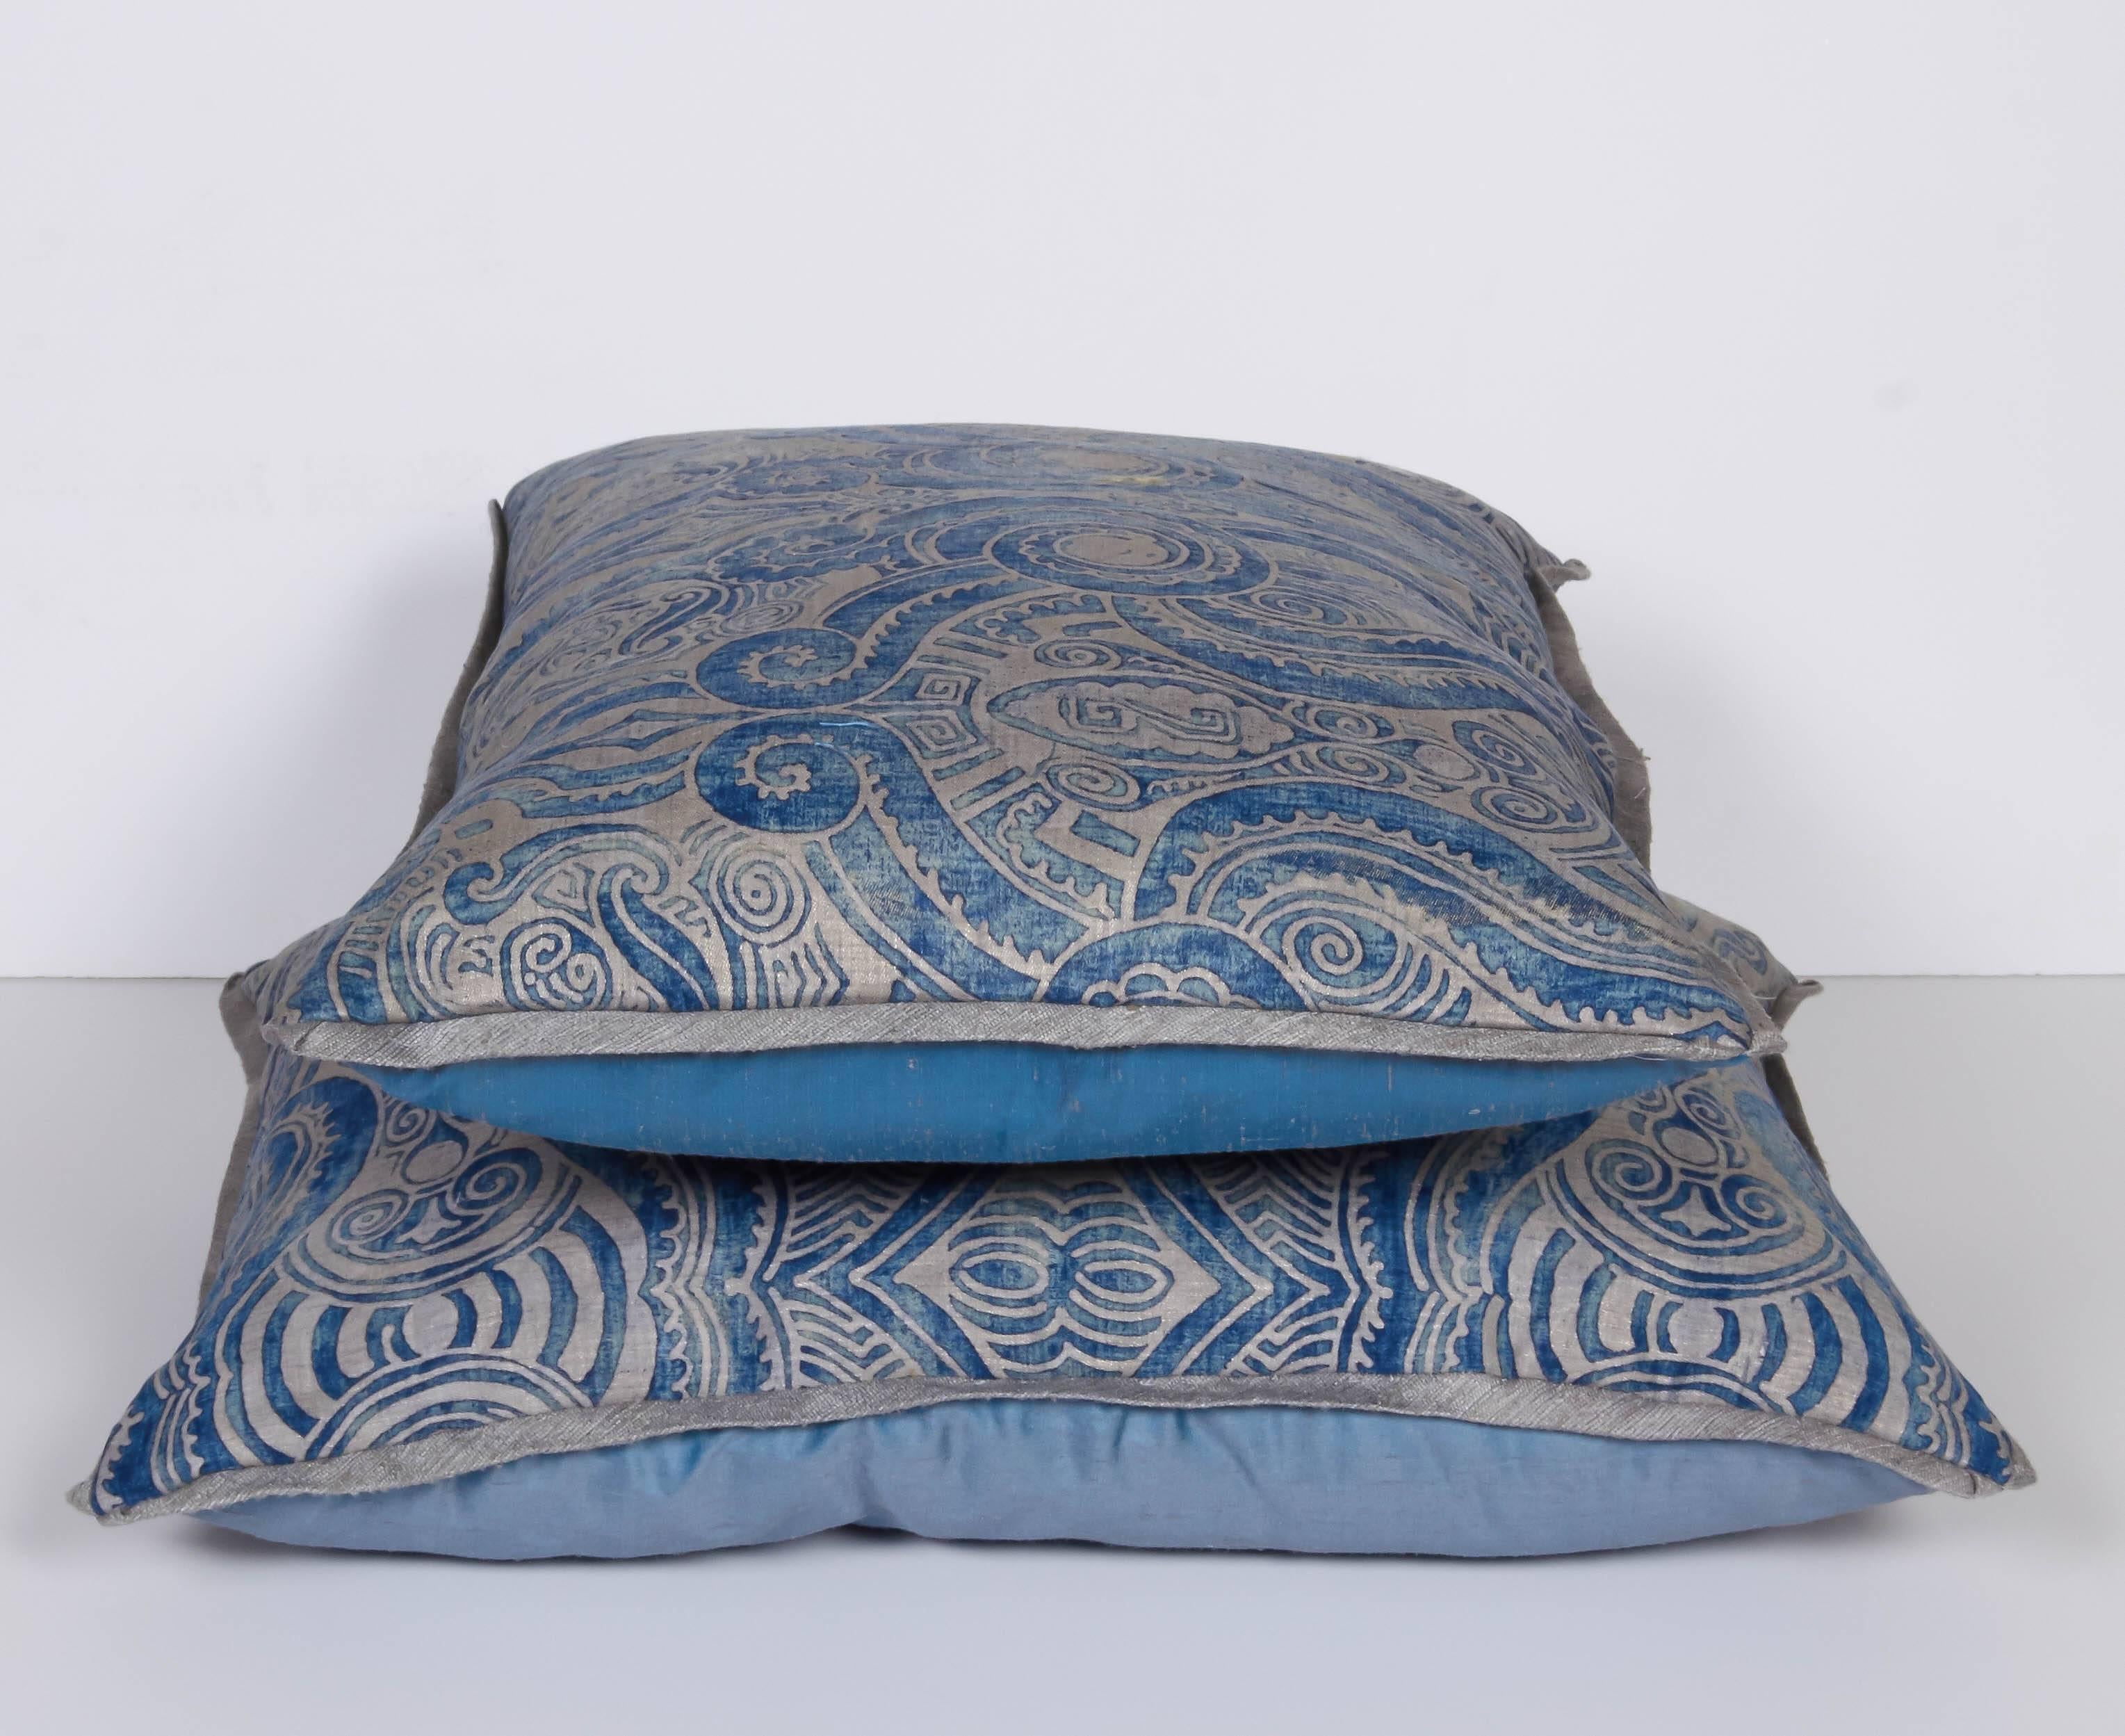 Contemporary A Pair of Fortuny Fabric Lumbar Cushions in the Peruviano Pattern